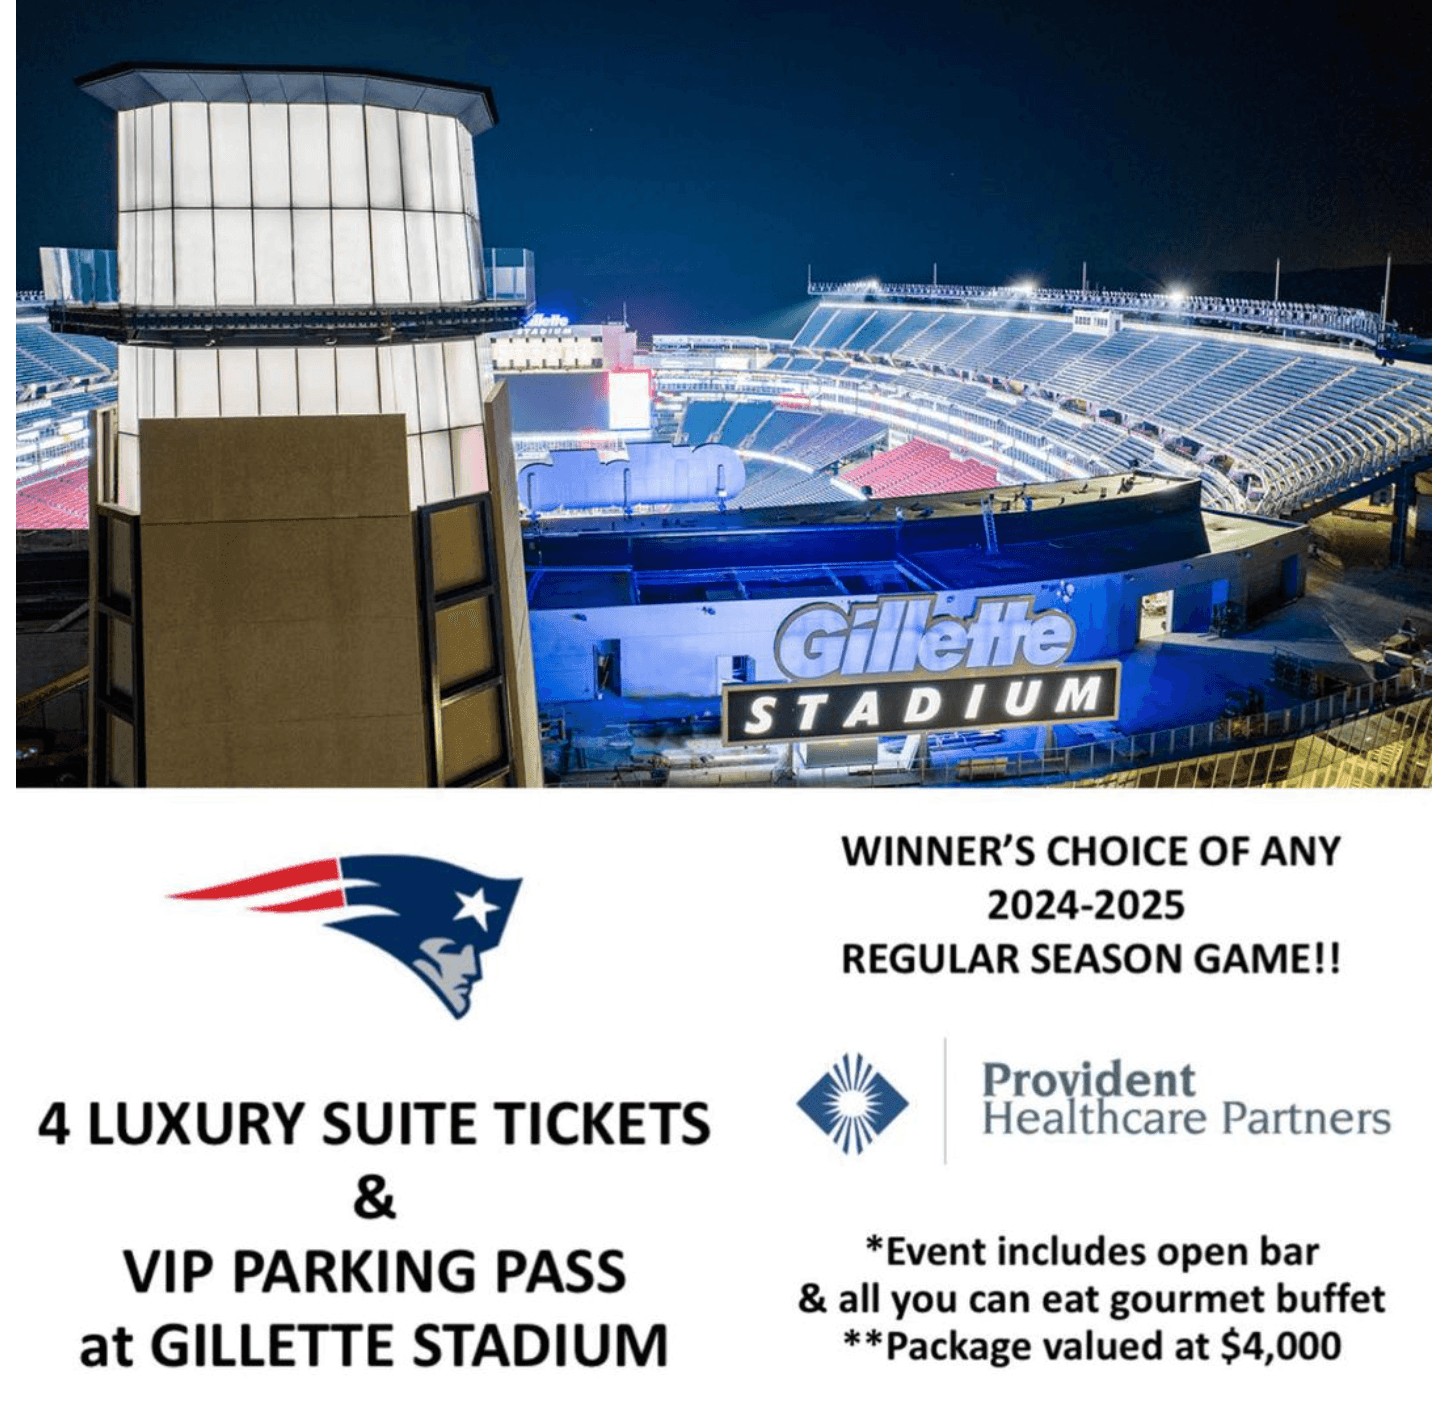 PATRIOTS LUXURY TICKETS FOR 4